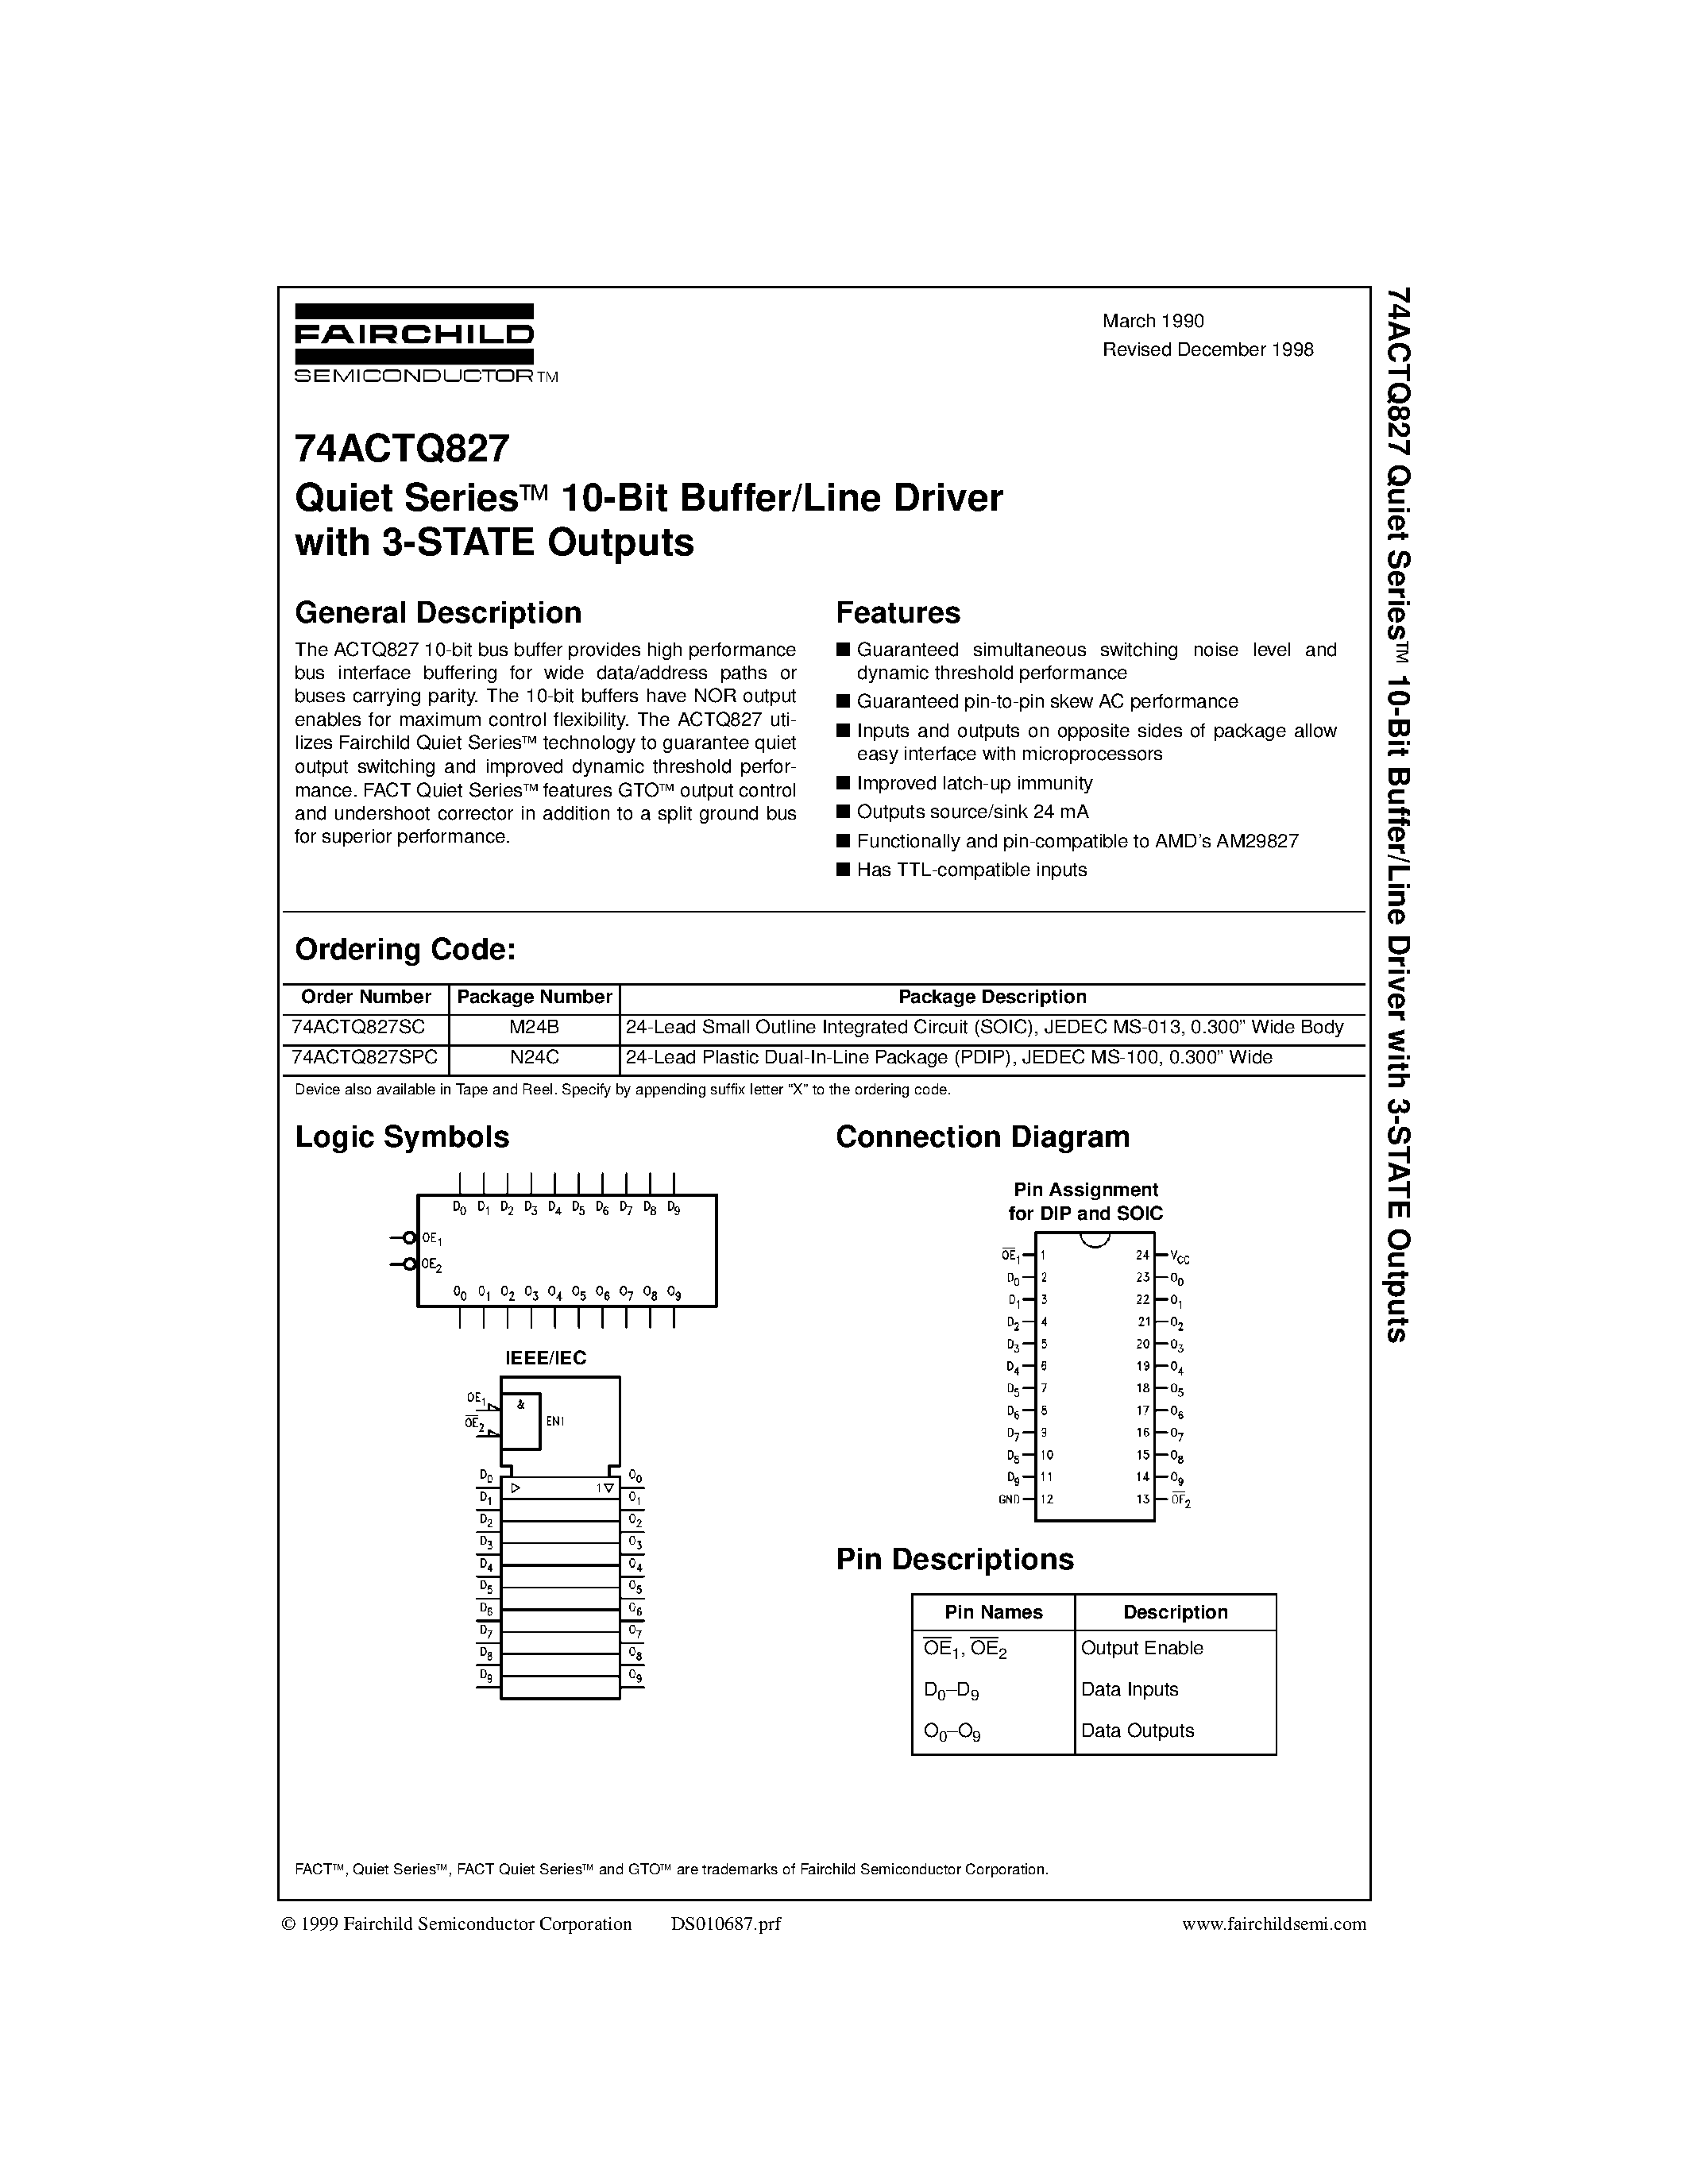 Datasheet 74ACTQ827SC - Quiet Seriesa 10-Bit Buffer/Line Driver with 3-STATE Outputs page 1